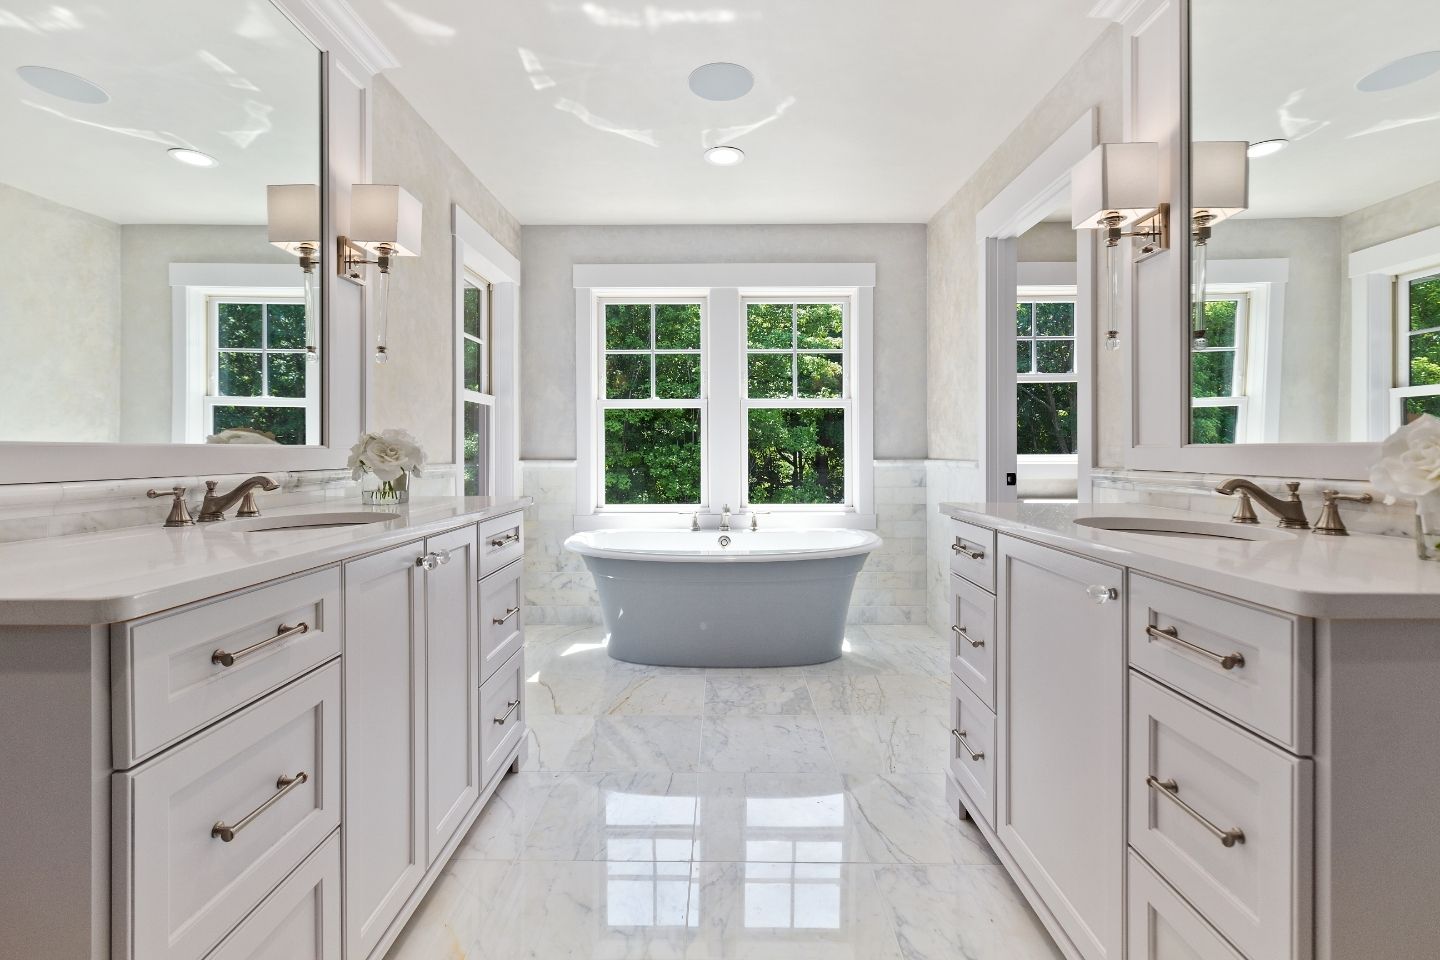 This spacious and elegantly designed bathroom features polished marble flooring and natural light flooding in through large windows overlooking greenery. The room features a luxurious freestanding bathtub centrally positioned, flanked by two white vanity cabinets with marble countertops and modern fixtures. Above each vanity hangs a stylish wall-mounted lamp, complementing the room's neutral color palette. The clean lines and reflective surfaces give this Athens, GA, bathroom a serene and opulent atmosphere.